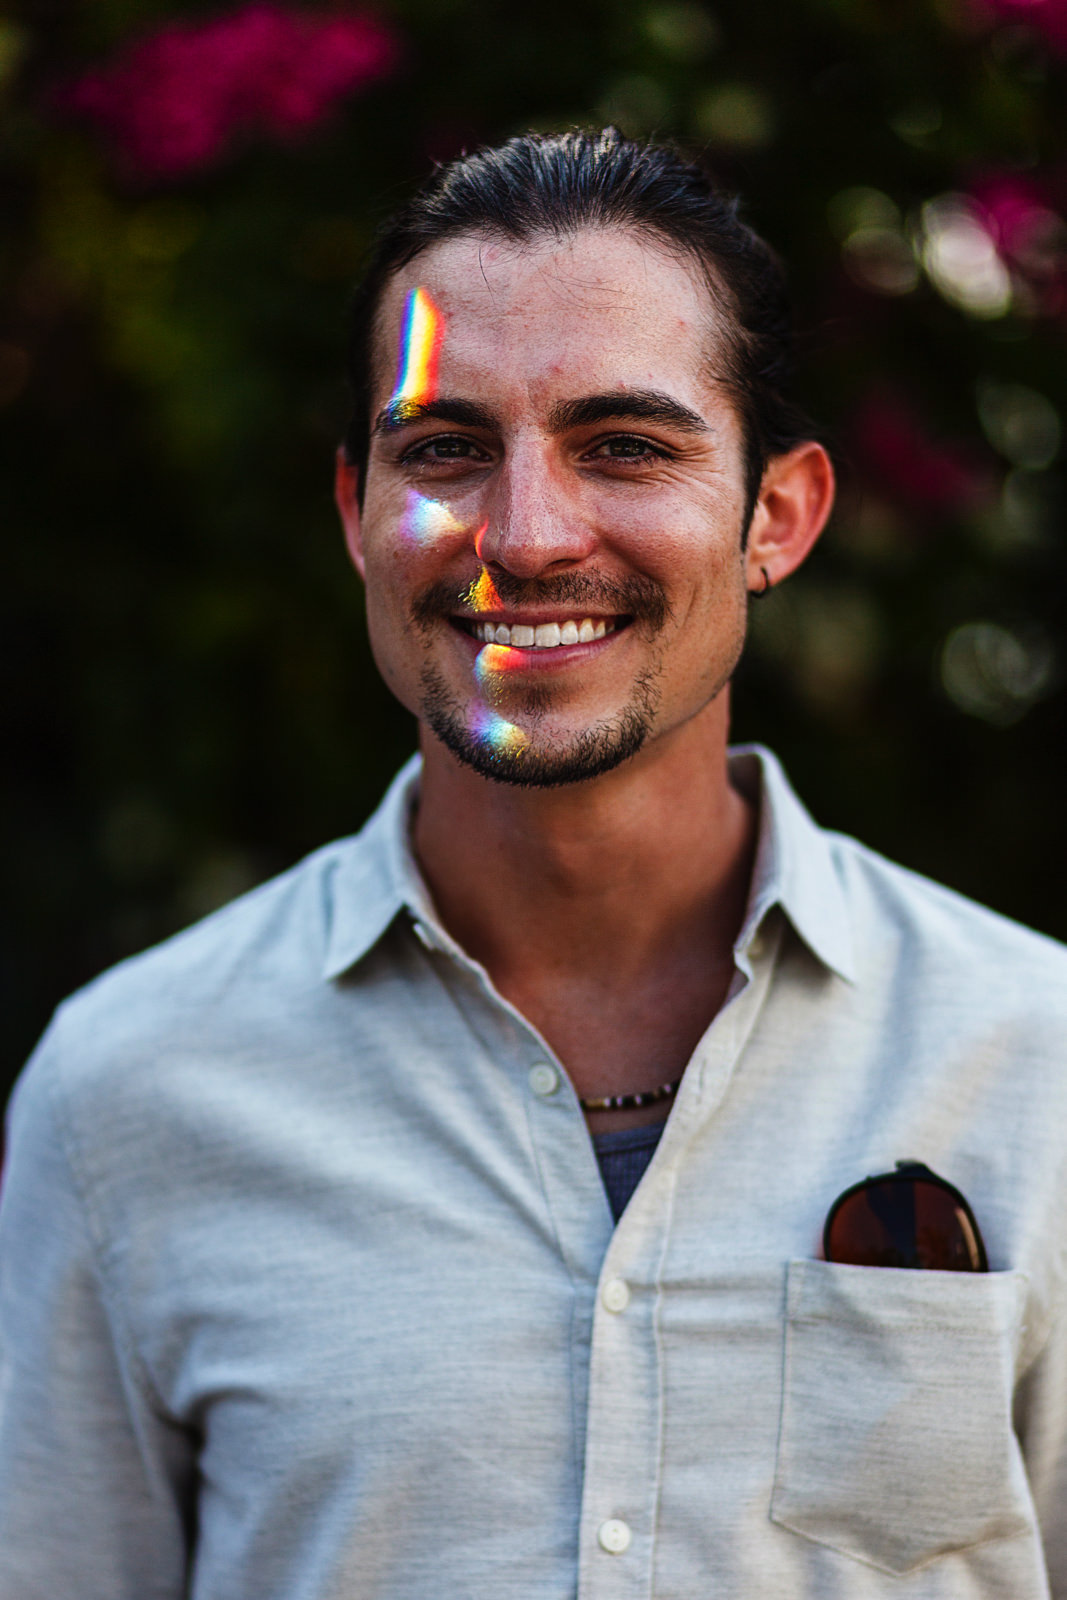 Groom portrait with a prism light on his face